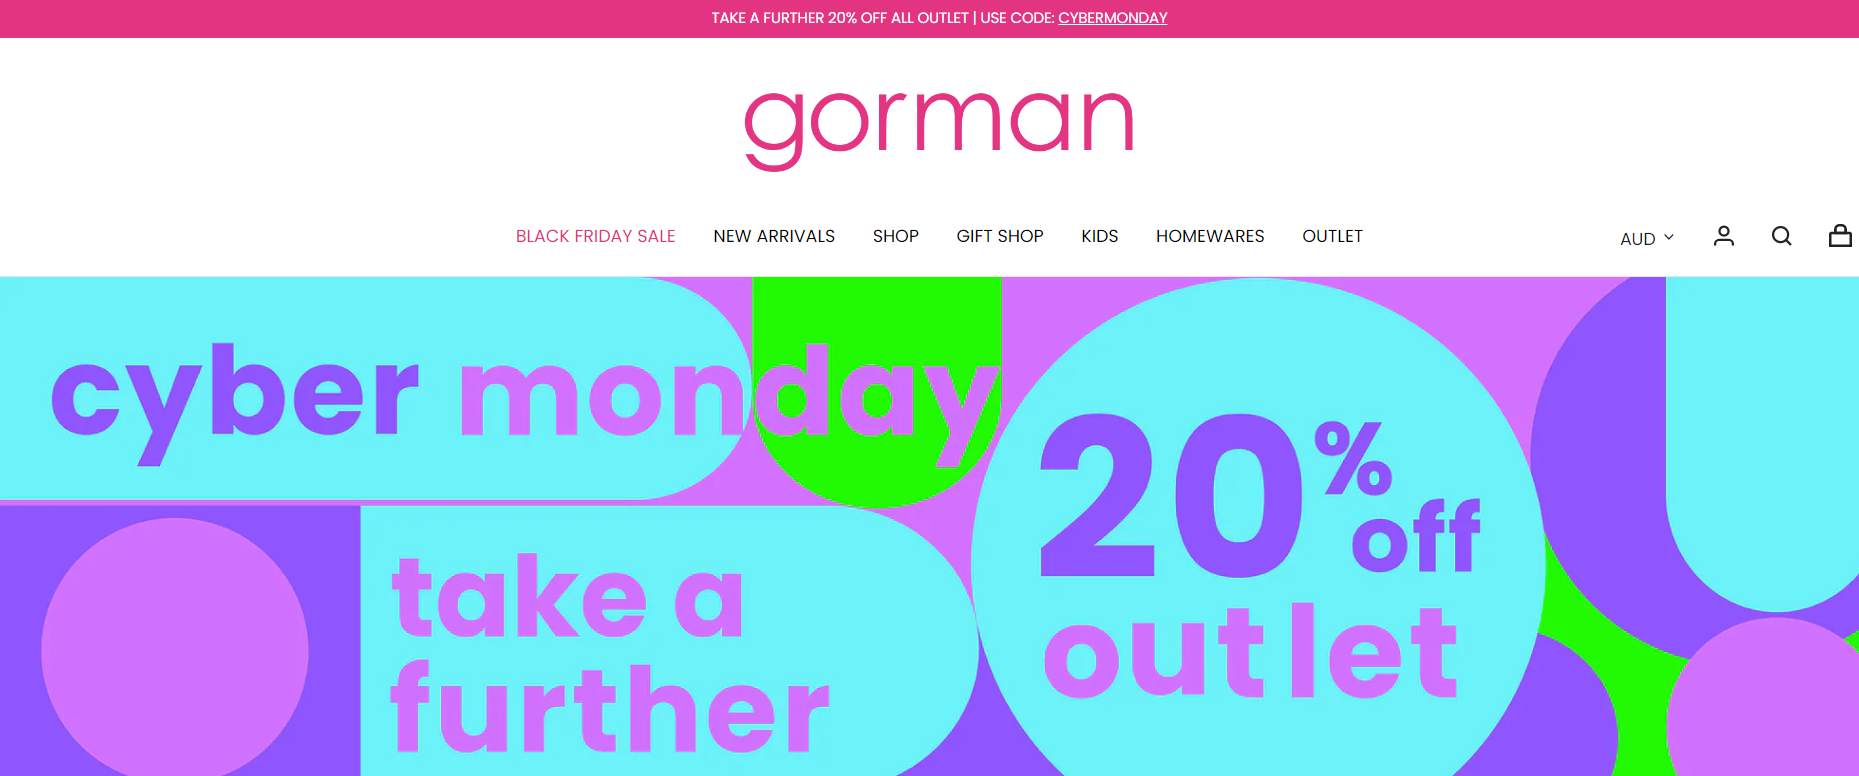 Gorman Cyber Monday - Further 20% OFF Markdowned items including outlet styles